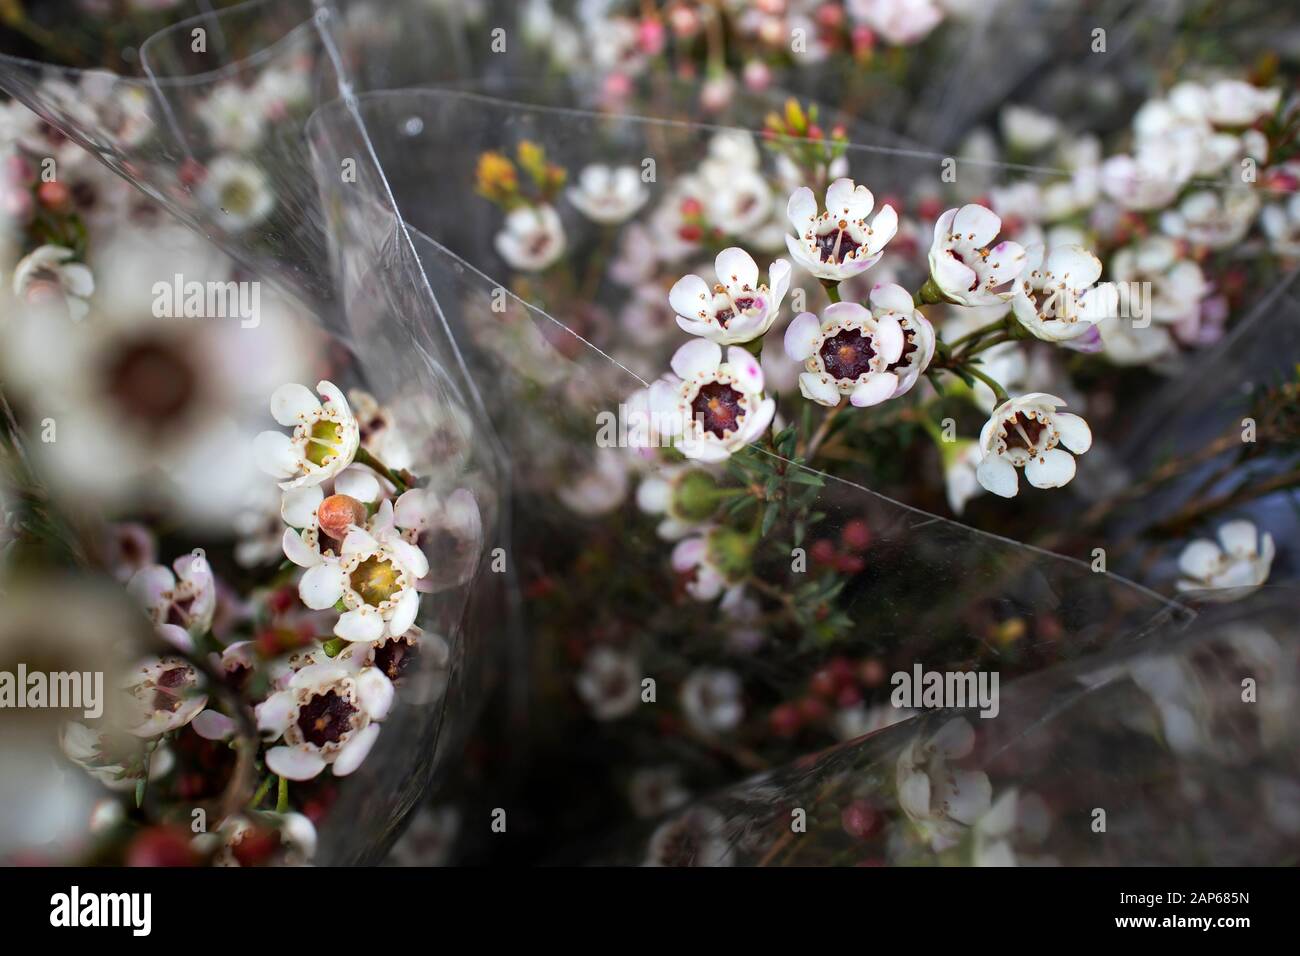 White and pink flowers of an Australian native Geraldton Wax cultivar,  Chamelaucium uncinatum, family Myrtaceae, endemic to Western Australia.  Winter Stock Photo - Alamy